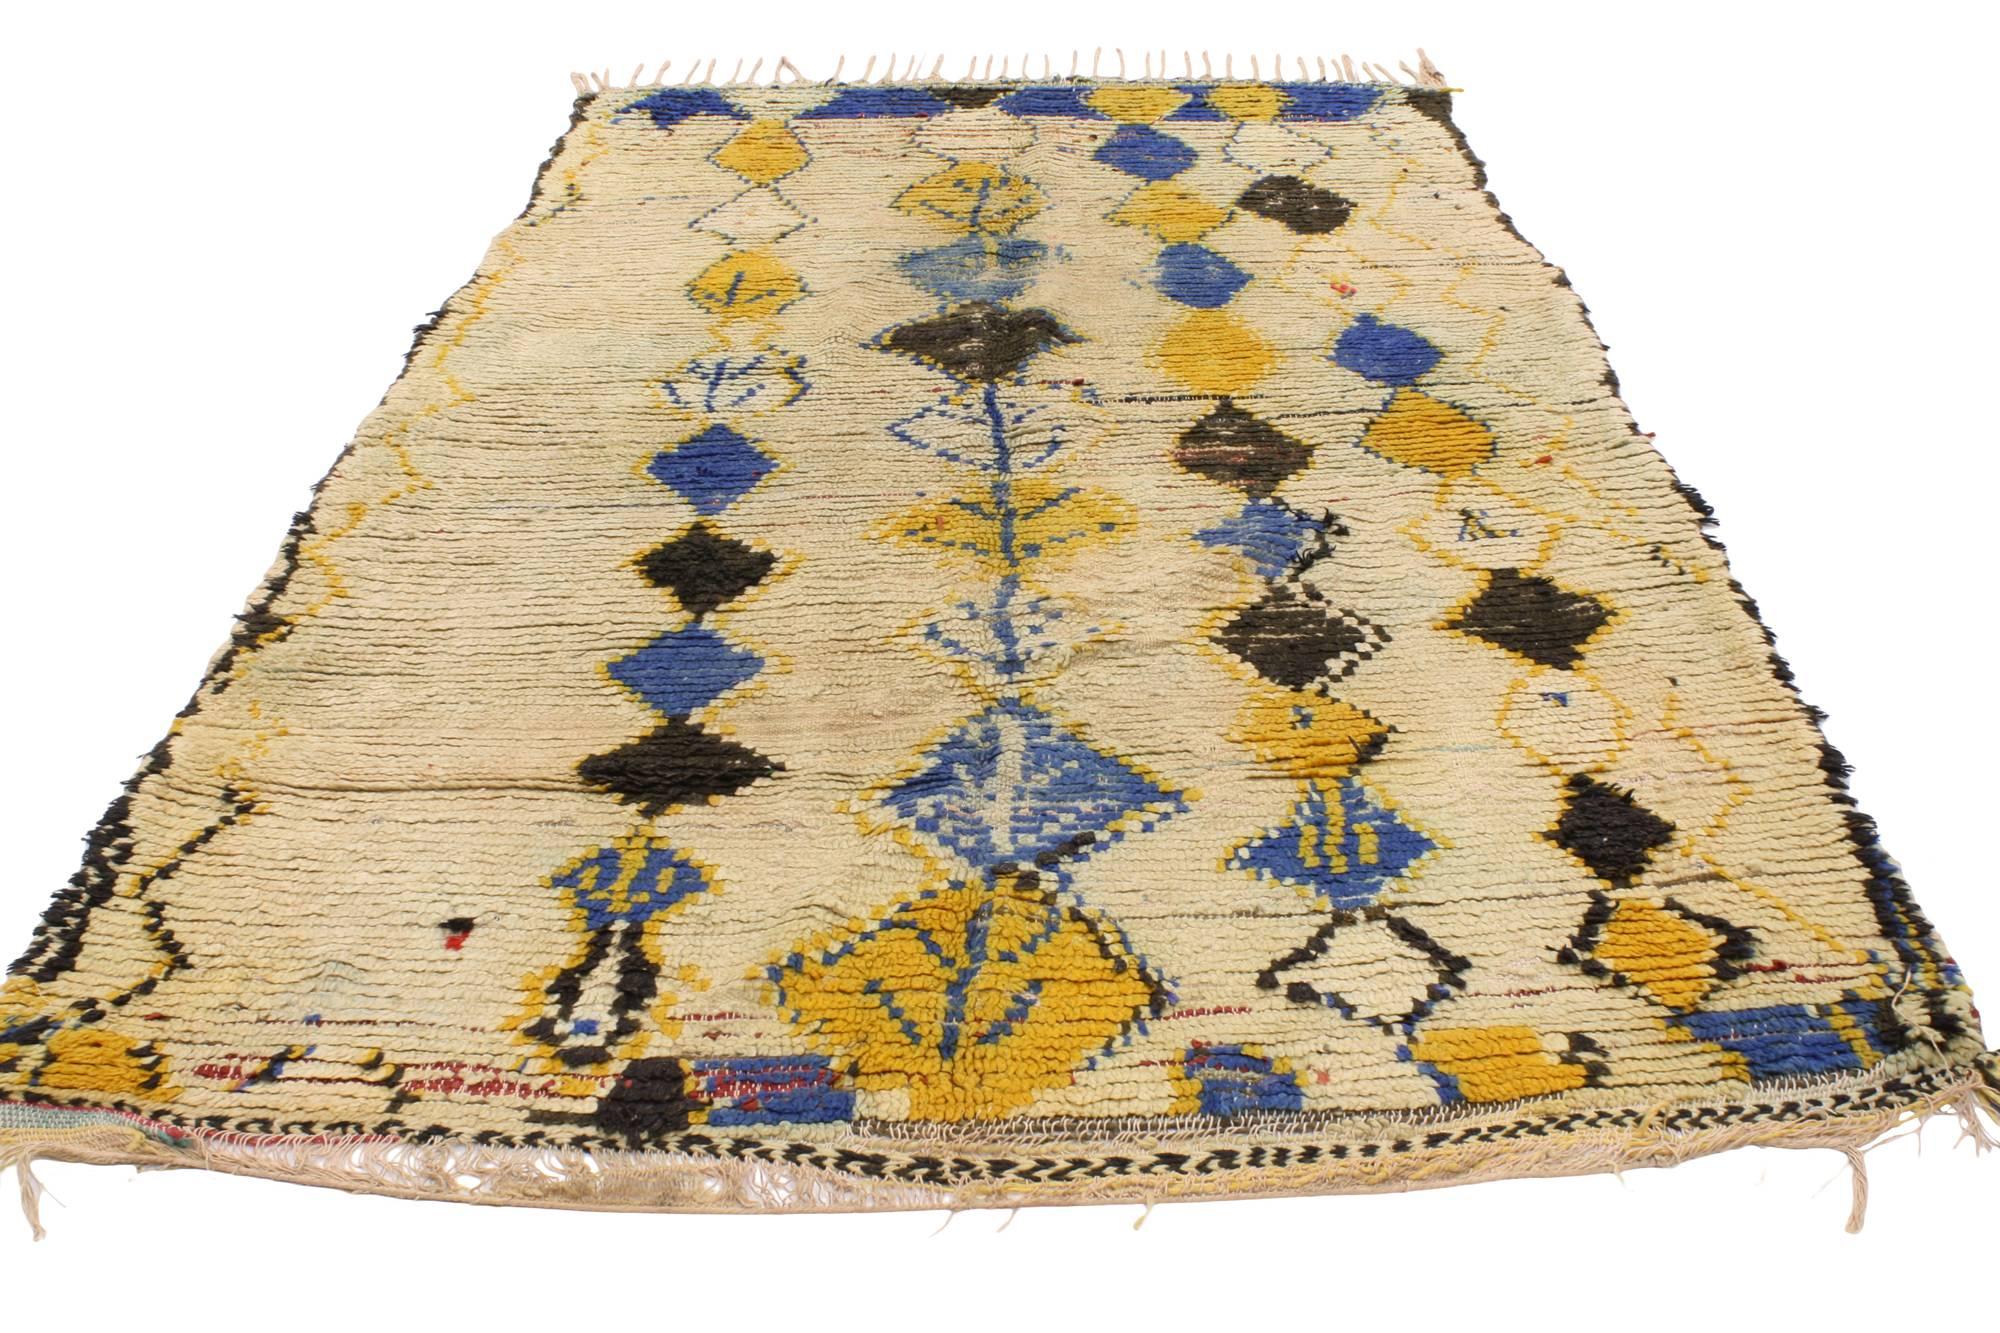 20486, vintage Berber Moroccan rug 05'00 x 06'10. The creamy-beige colored background allows the Stark colors to stand out. The vintage Berber Moroccan rug is primarily designed with four strings of asymmetrical diamonds running from top to bottom,